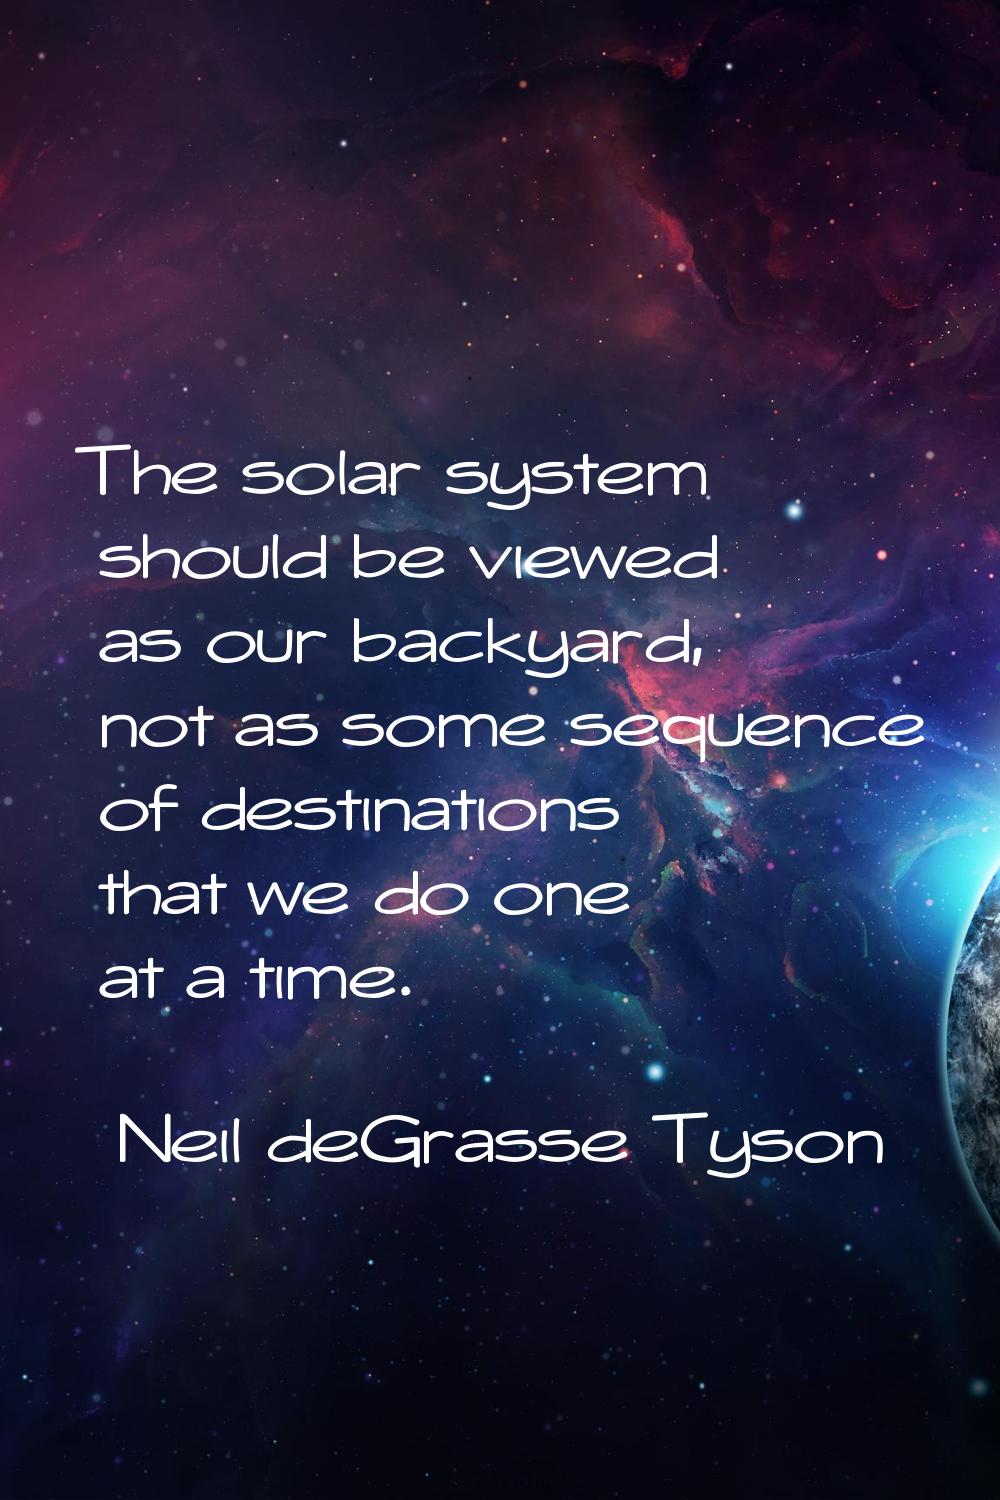 The solar system should be viewed as our backyard, not as some sequence of destinations that we do 